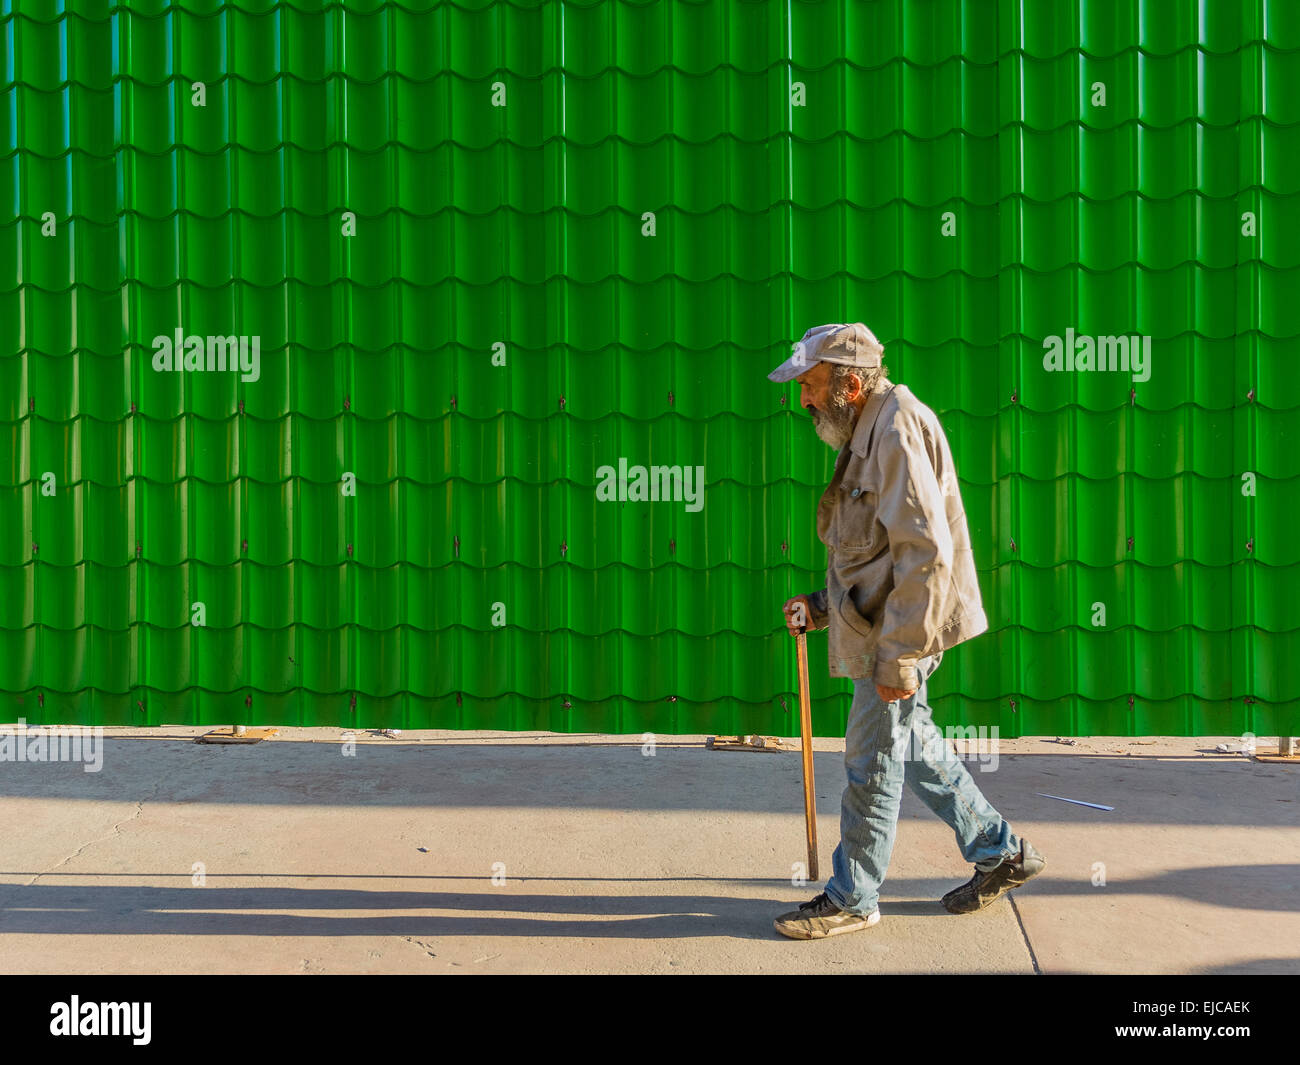 A Cuban male senior citizen walks in late afternoon light with a cane, wearing a baseball type hat against a green background. Stock Photo